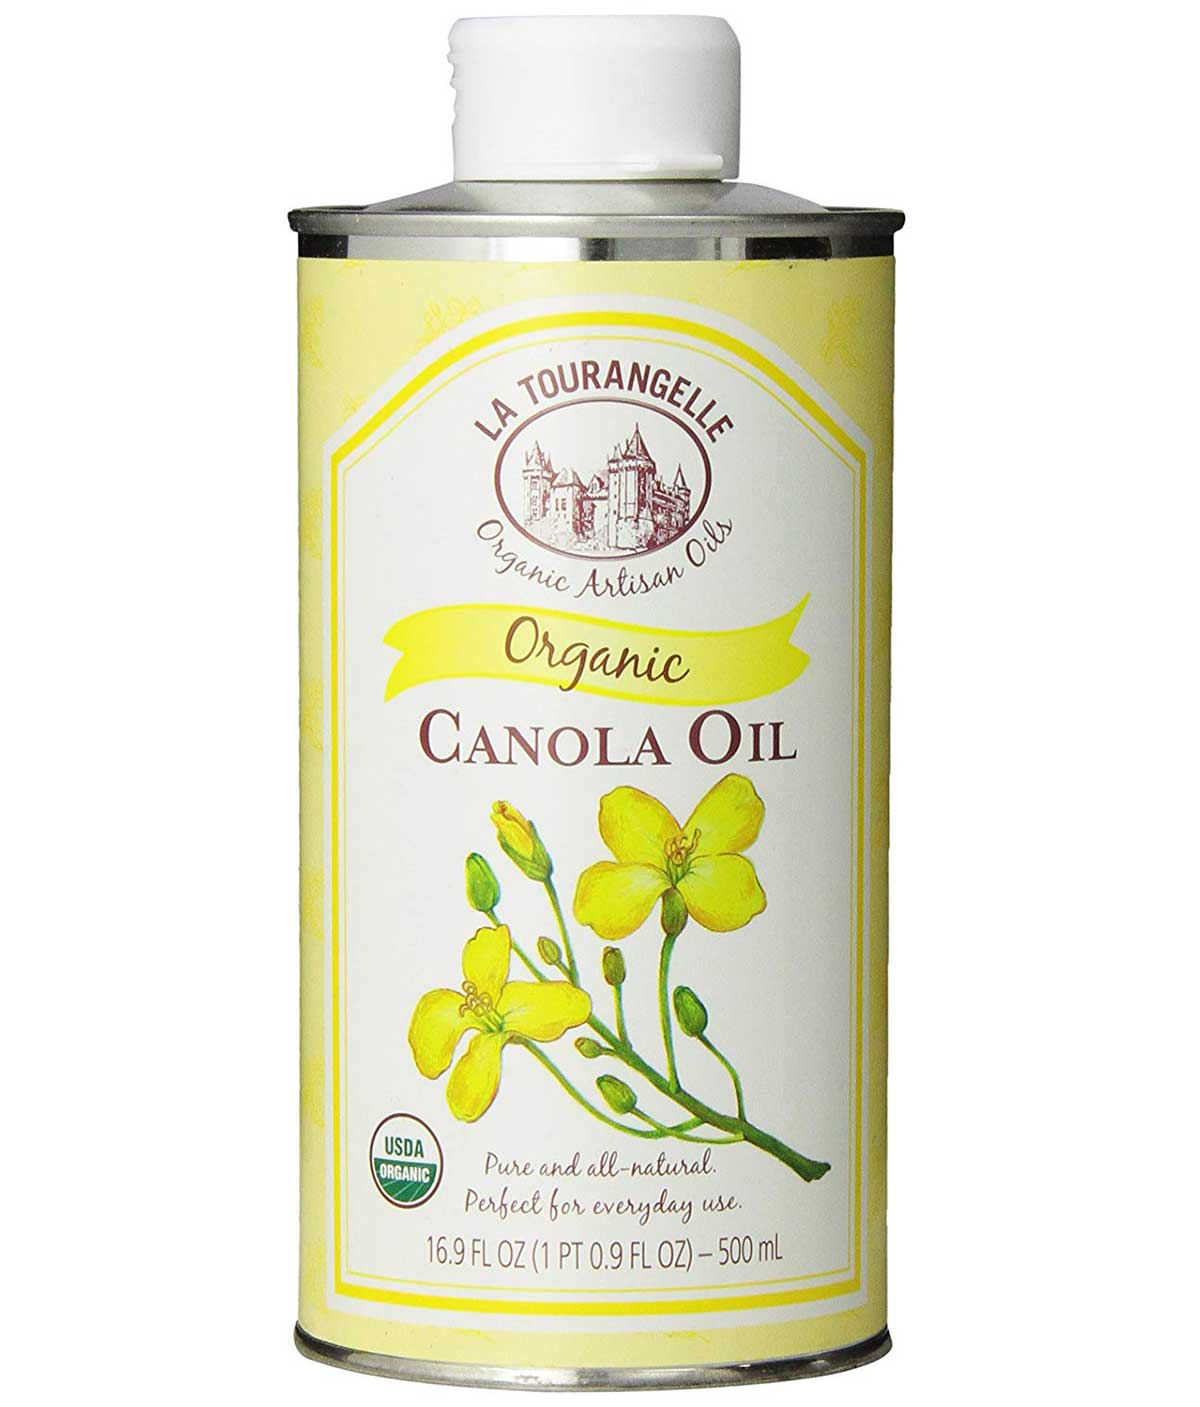 Canola Oil 101: Here's What You Need to Know | Saveur